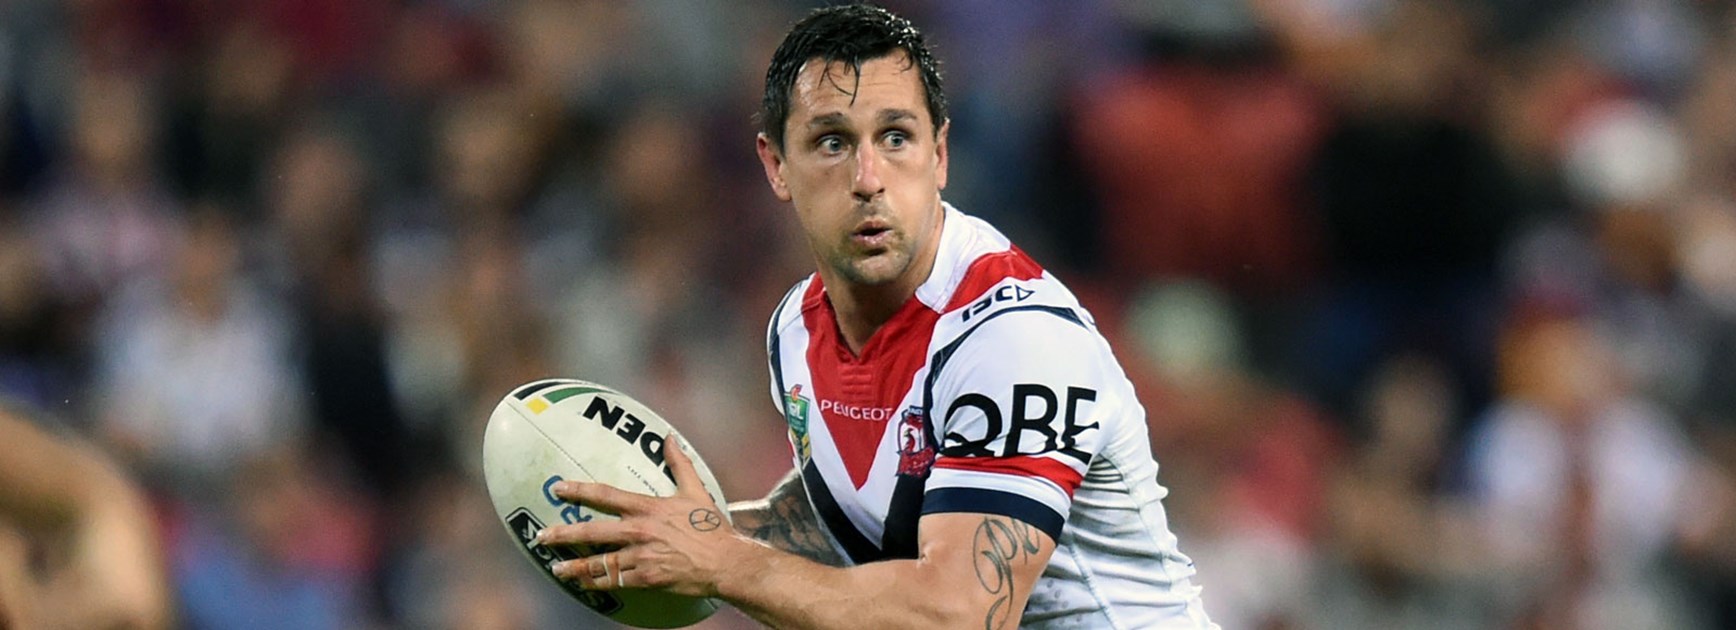 Roosters halfback Mitchell Pearce against the Broncos in Round 26.